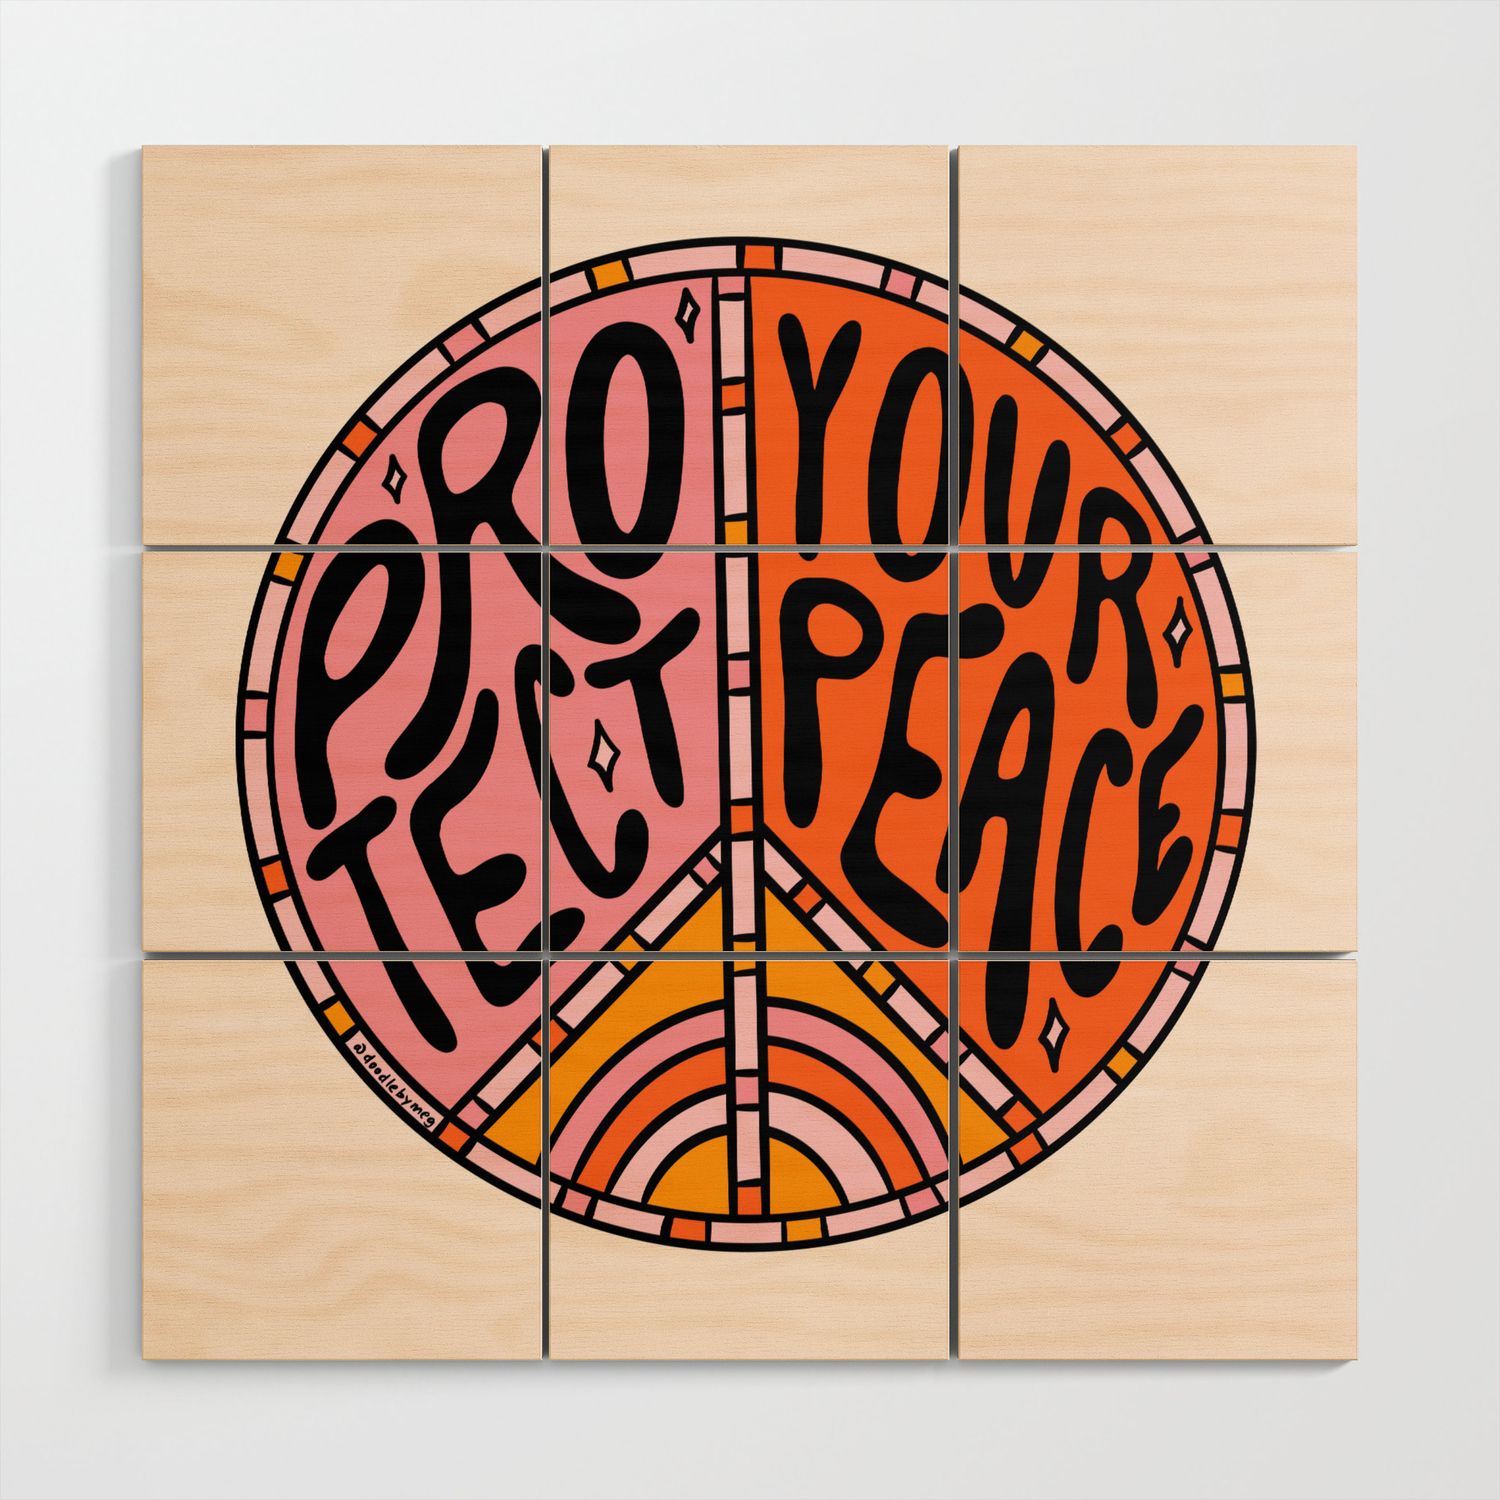 Protect Your Peace Wood Wall Artdoodlemeg | Society6 Inside Most Recent Peace Wood Wall Art (View 4 of 20)